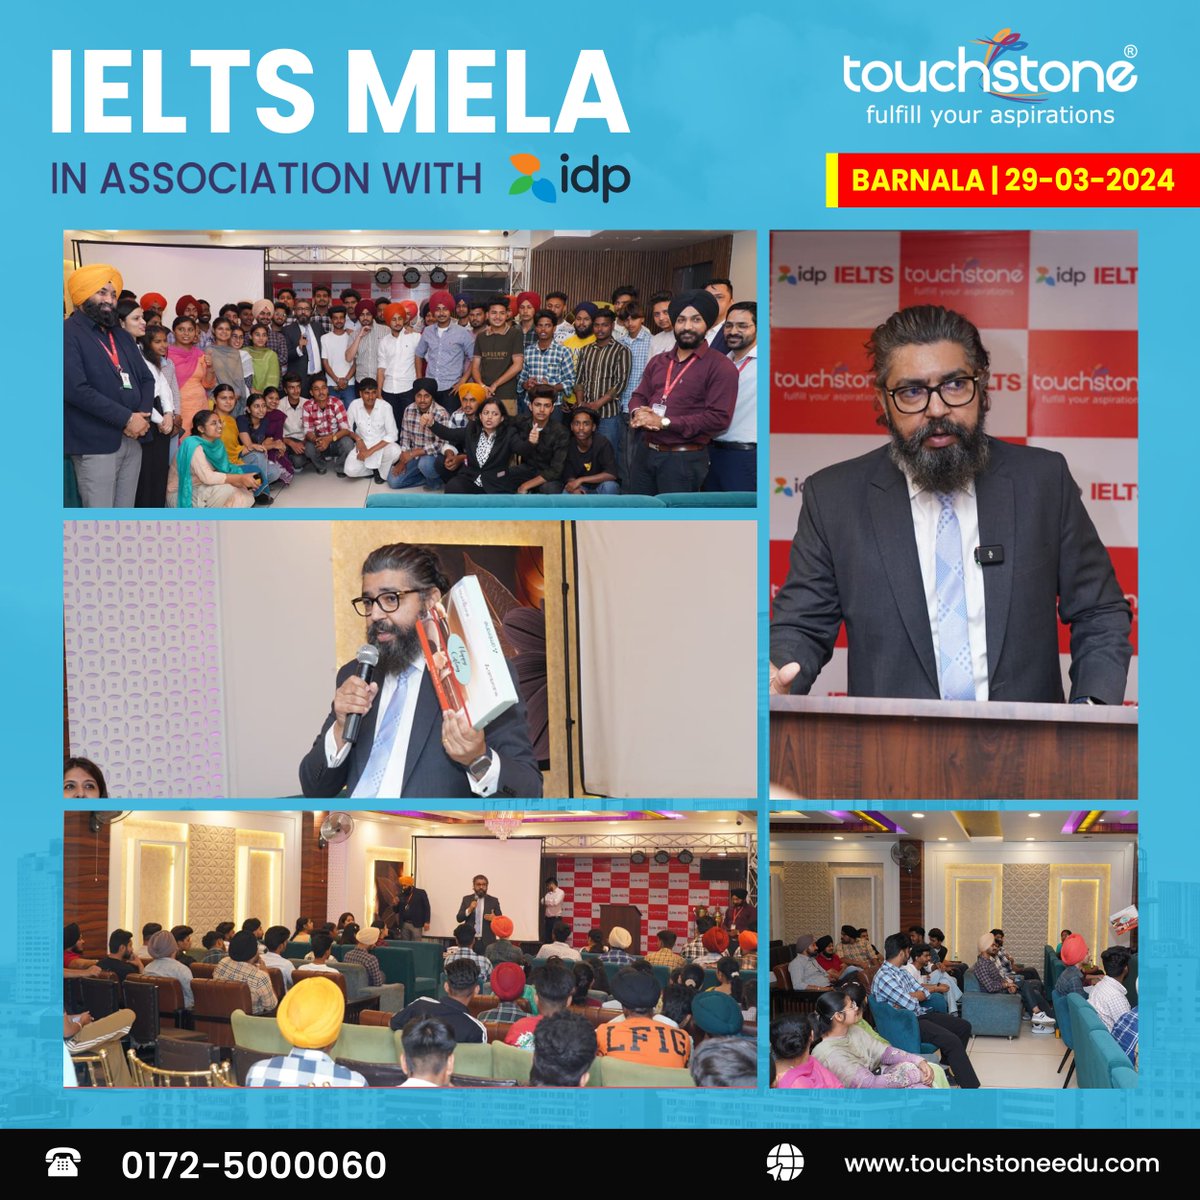 Dive into an exhilarating day at the IELTS MELA! Today, our students engaged with esteemed education experts and IDP master trainers in Barnala. Featuring an inspiring keynote address by Mr. Ashutosh Anand, CEO of Touchstone Educationals. 
#IDP #ielts #educationalcollaboration